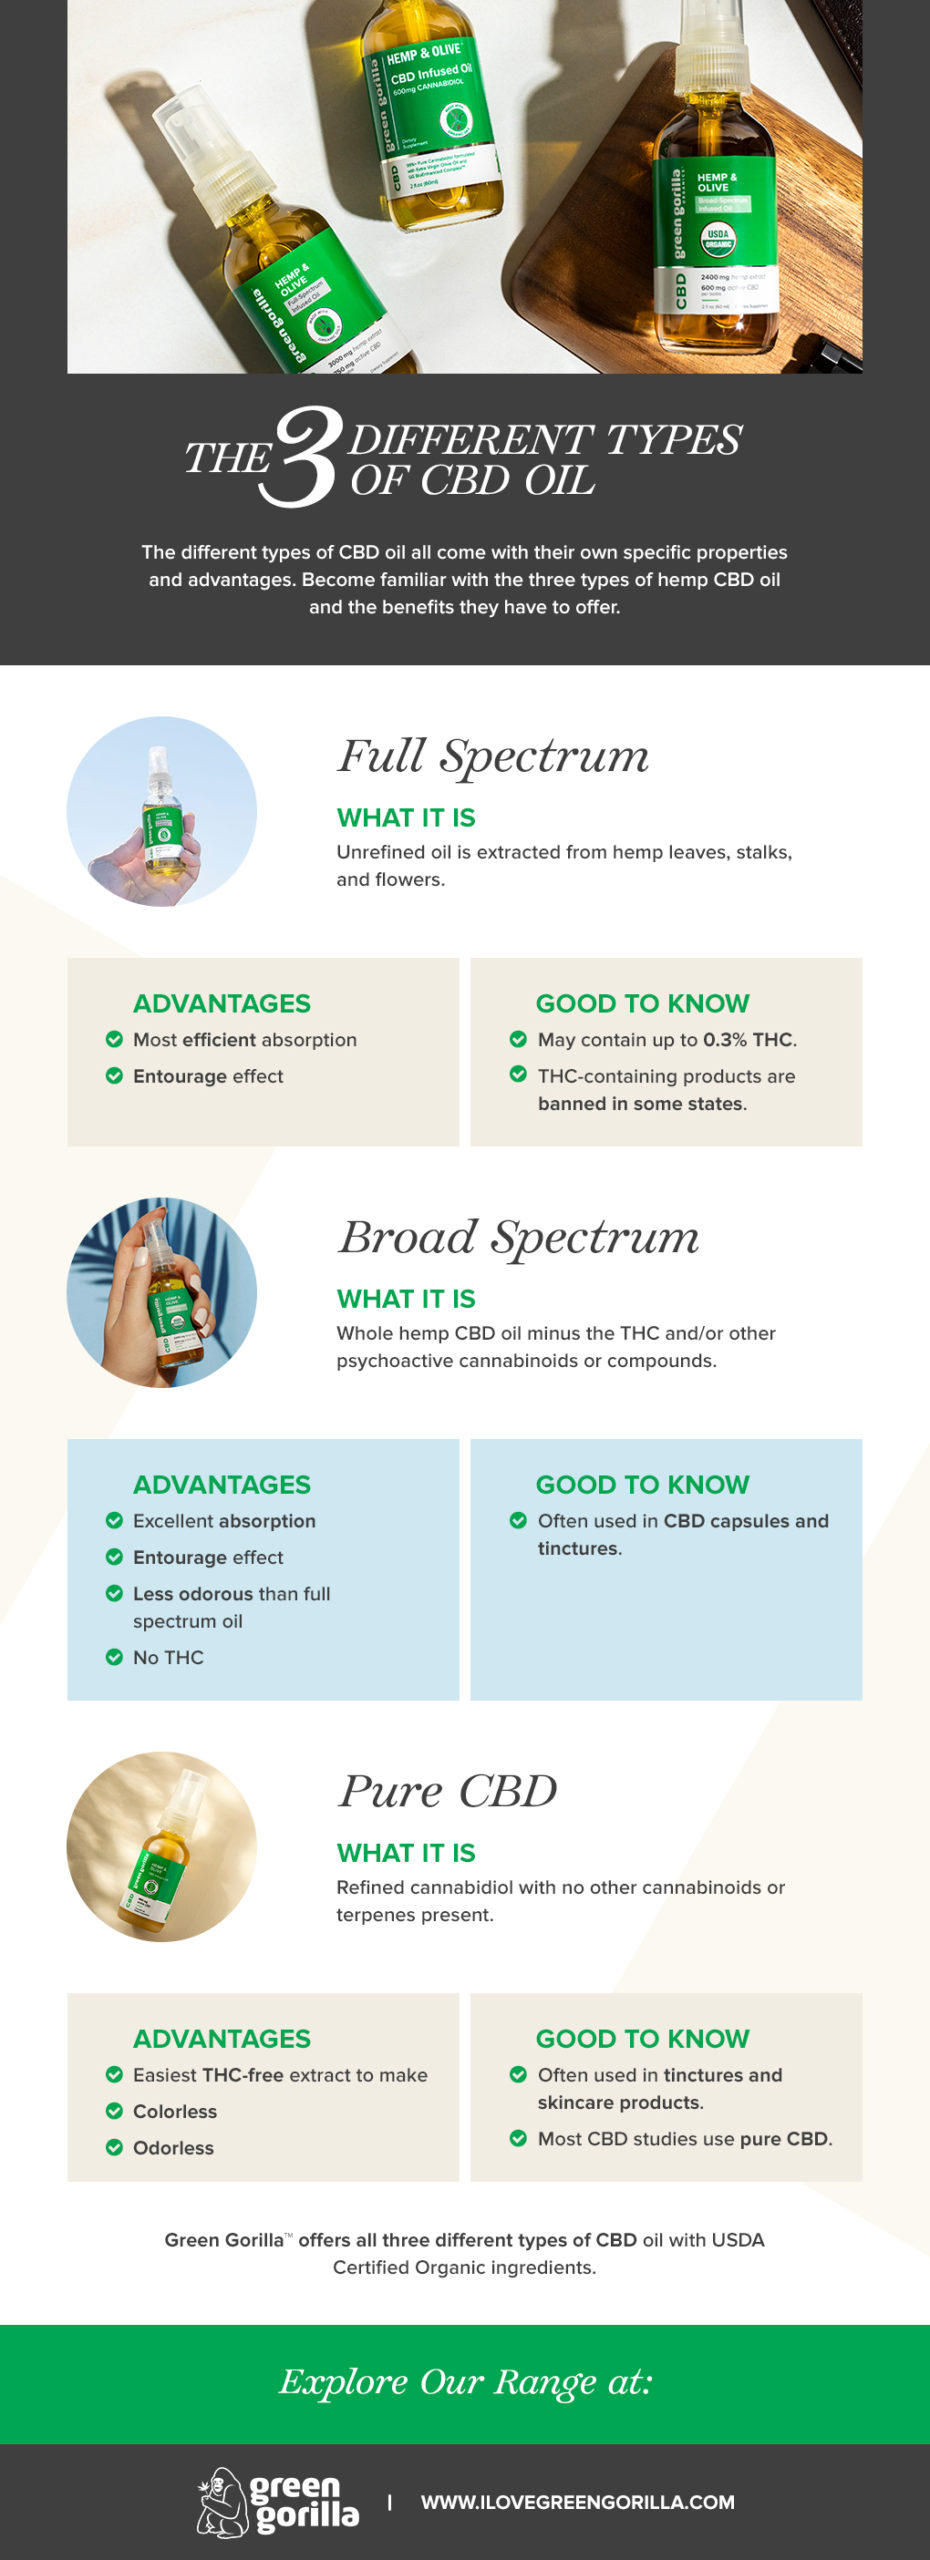 An infographic detailing the three different types of CBD oil